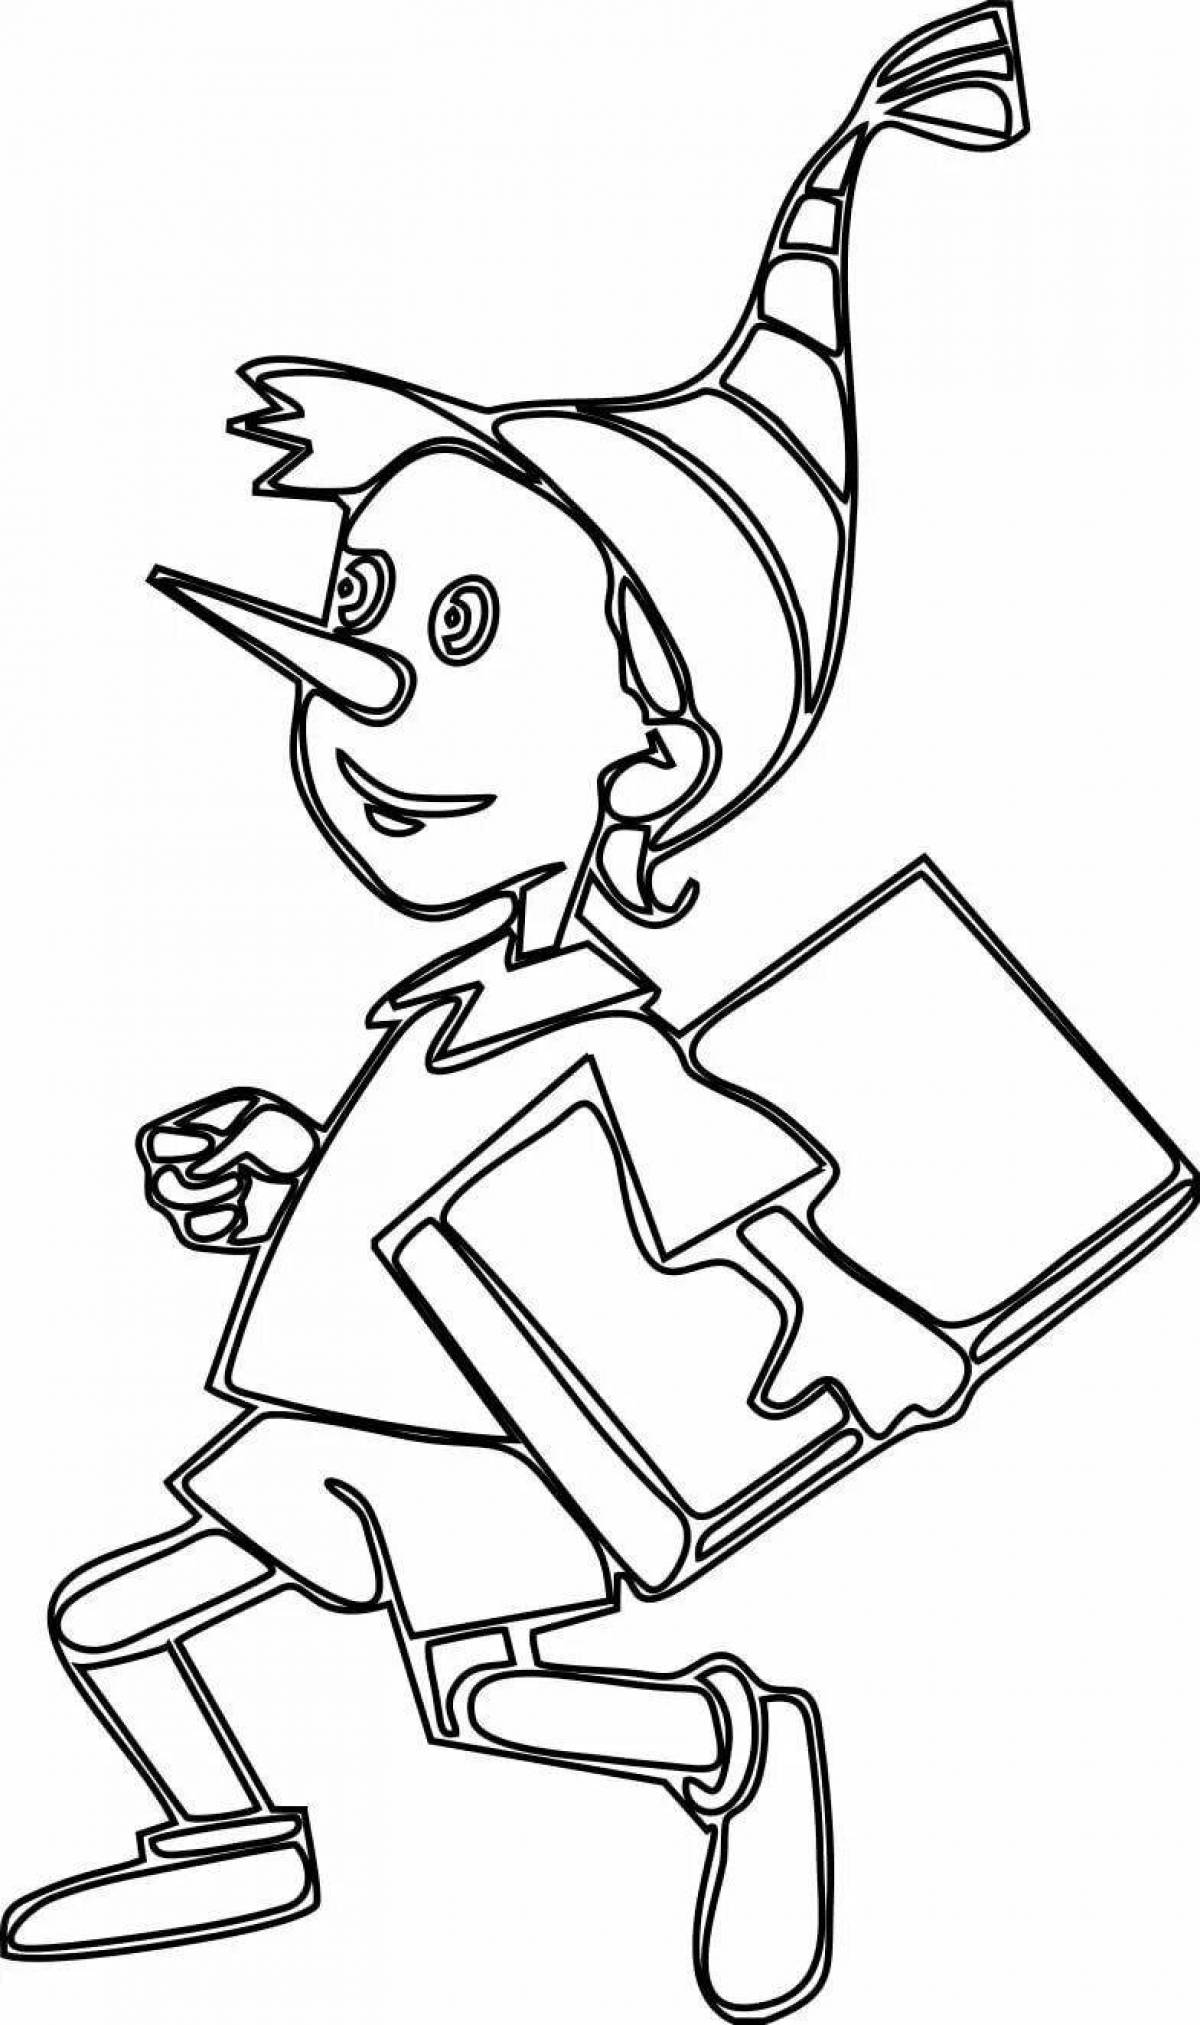 Animated pinocchio coloring book